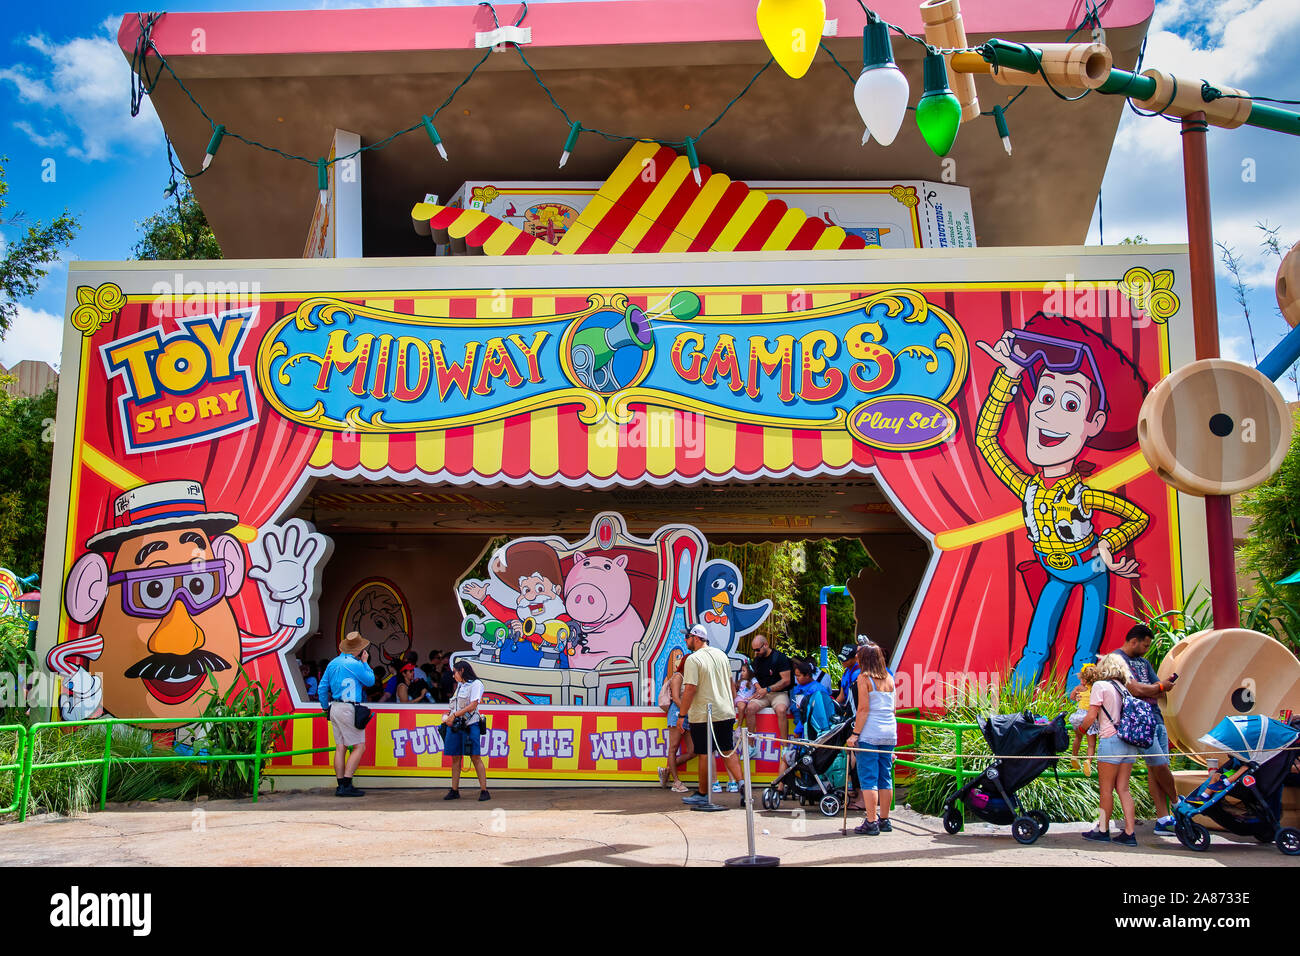 Entrance to Toy Story Mania ride at Hllywood Studios Stock Photo